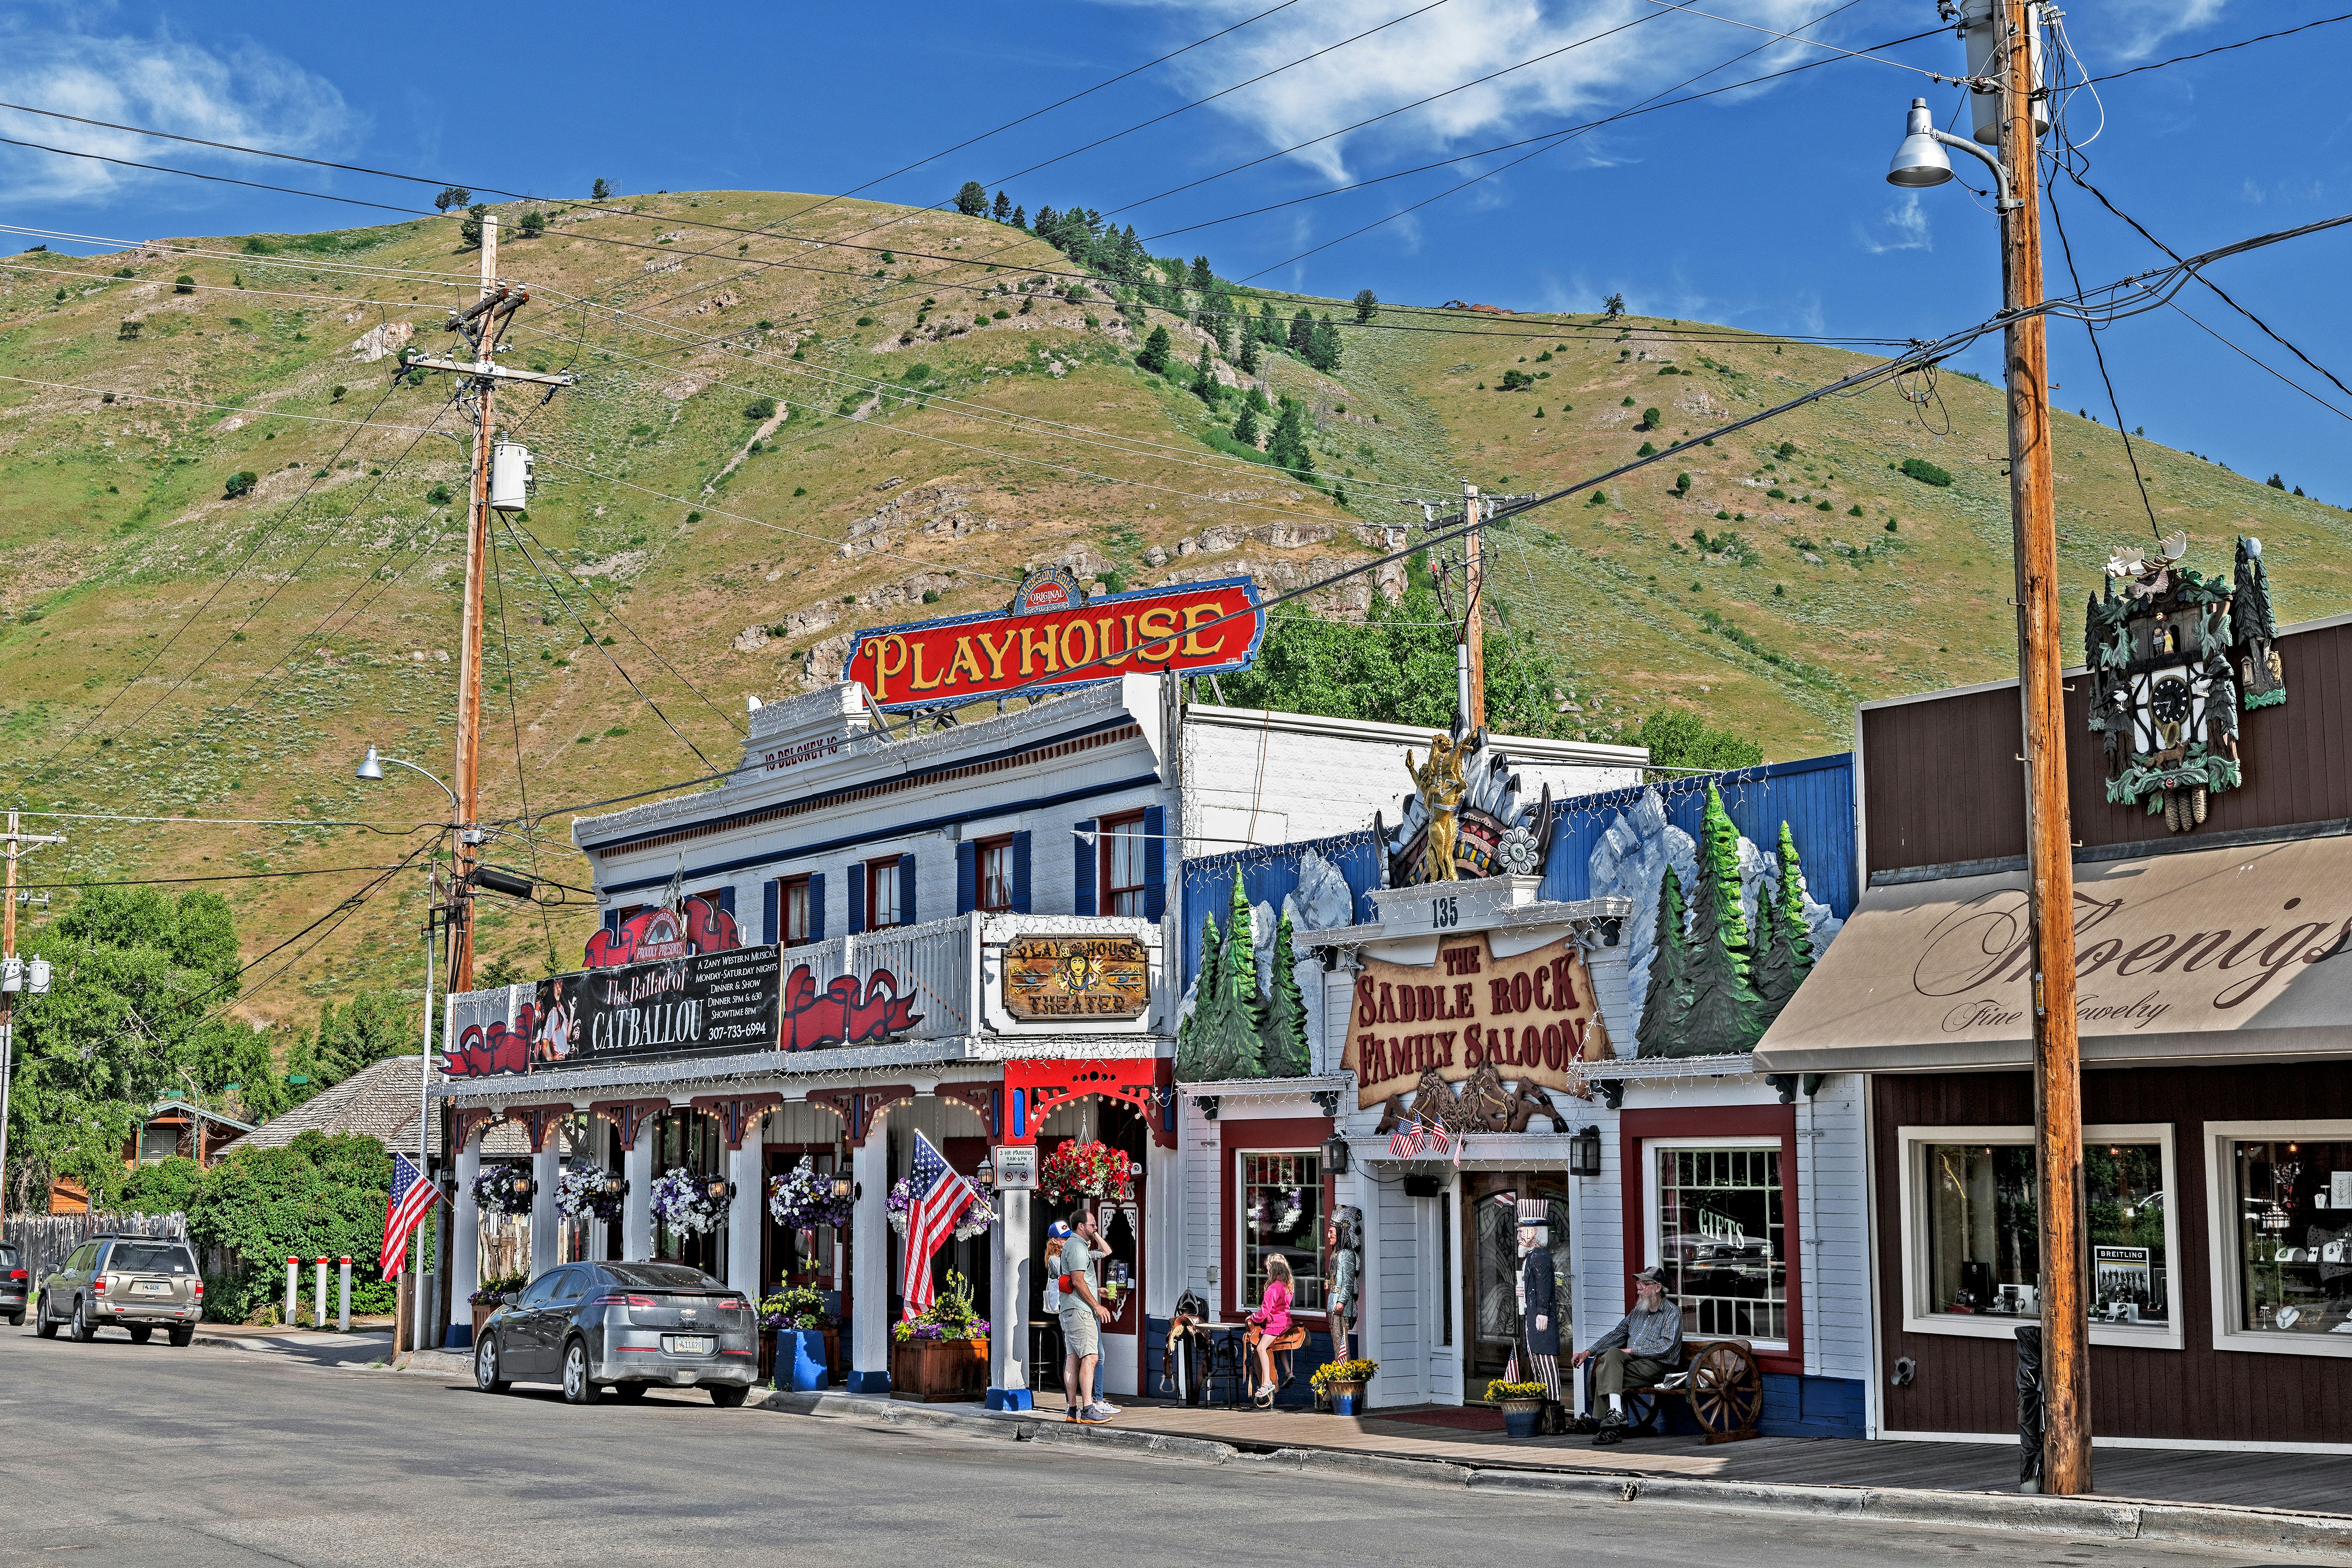 Exterior view of Jackson Hole Playhouse is an old western-style saloon. There is a large green hill in the background. 